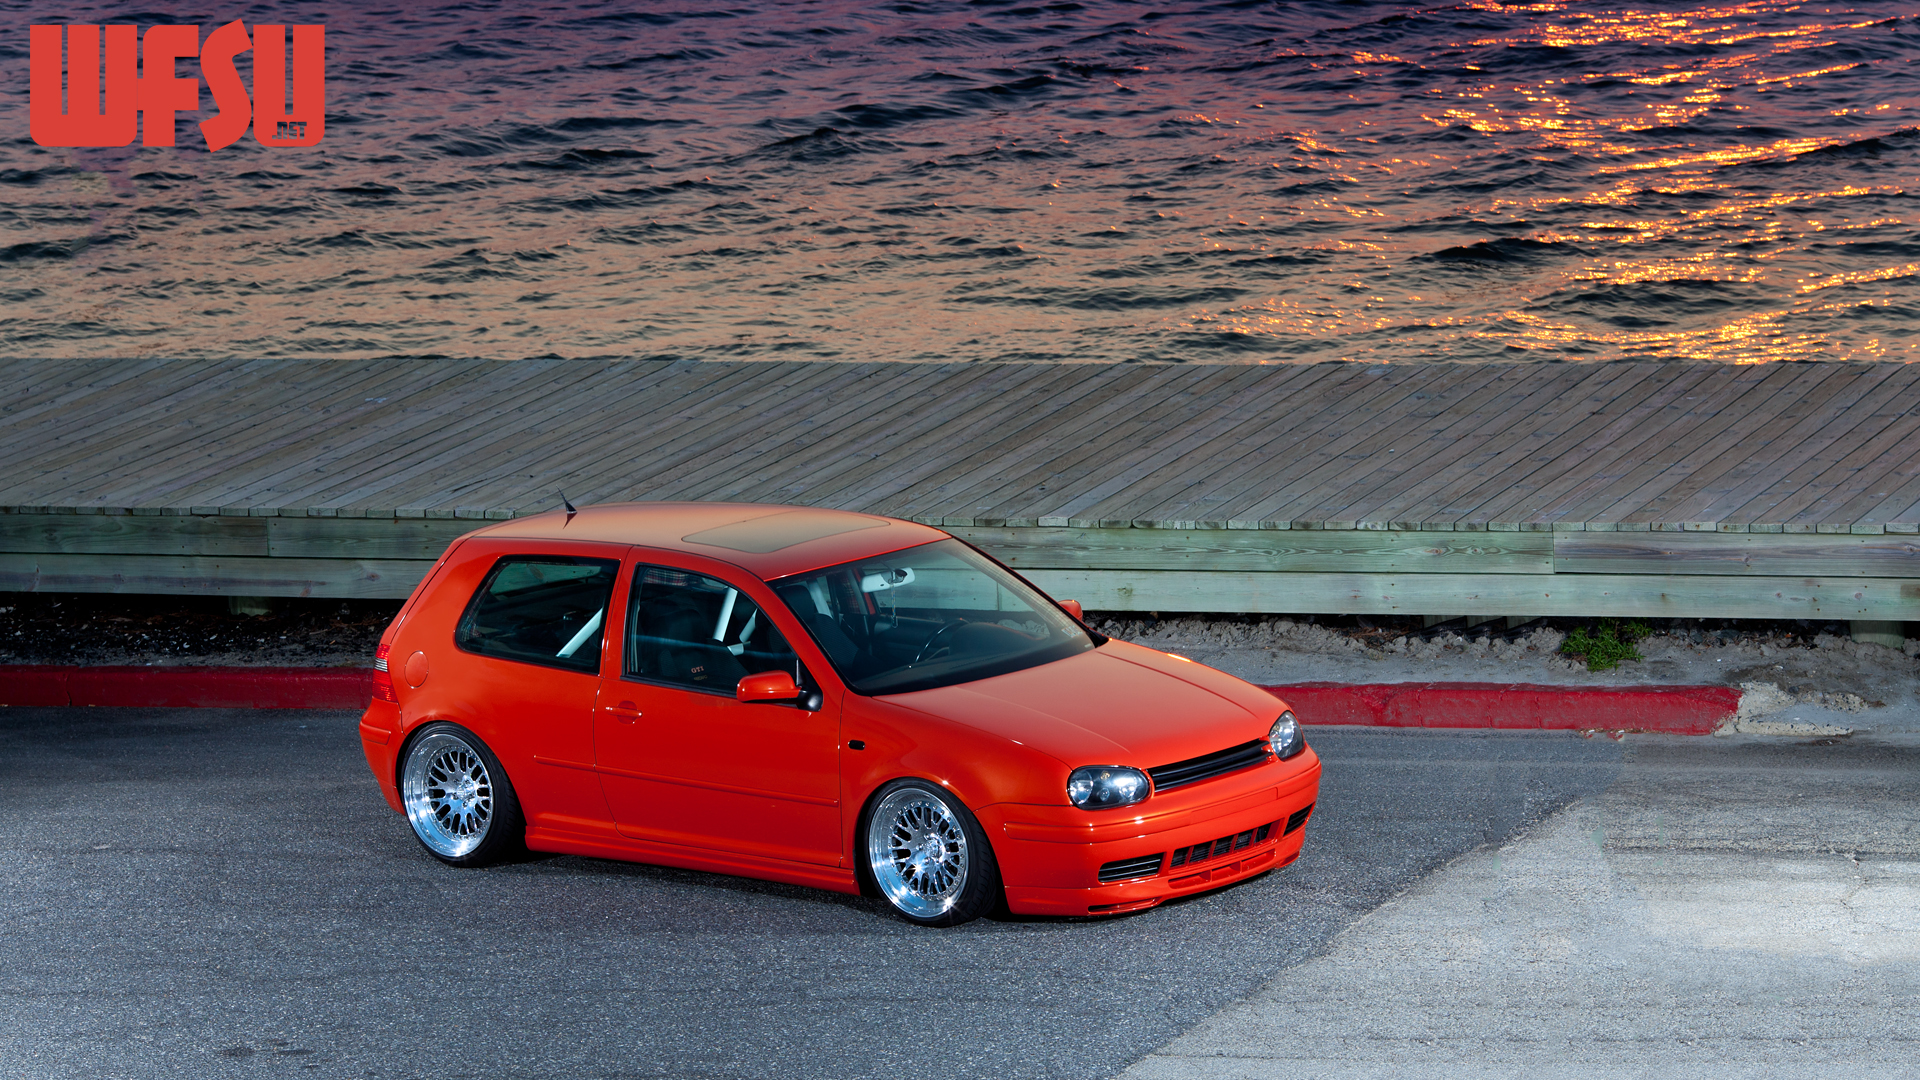 Wallpaper Wednesday - MK4 and